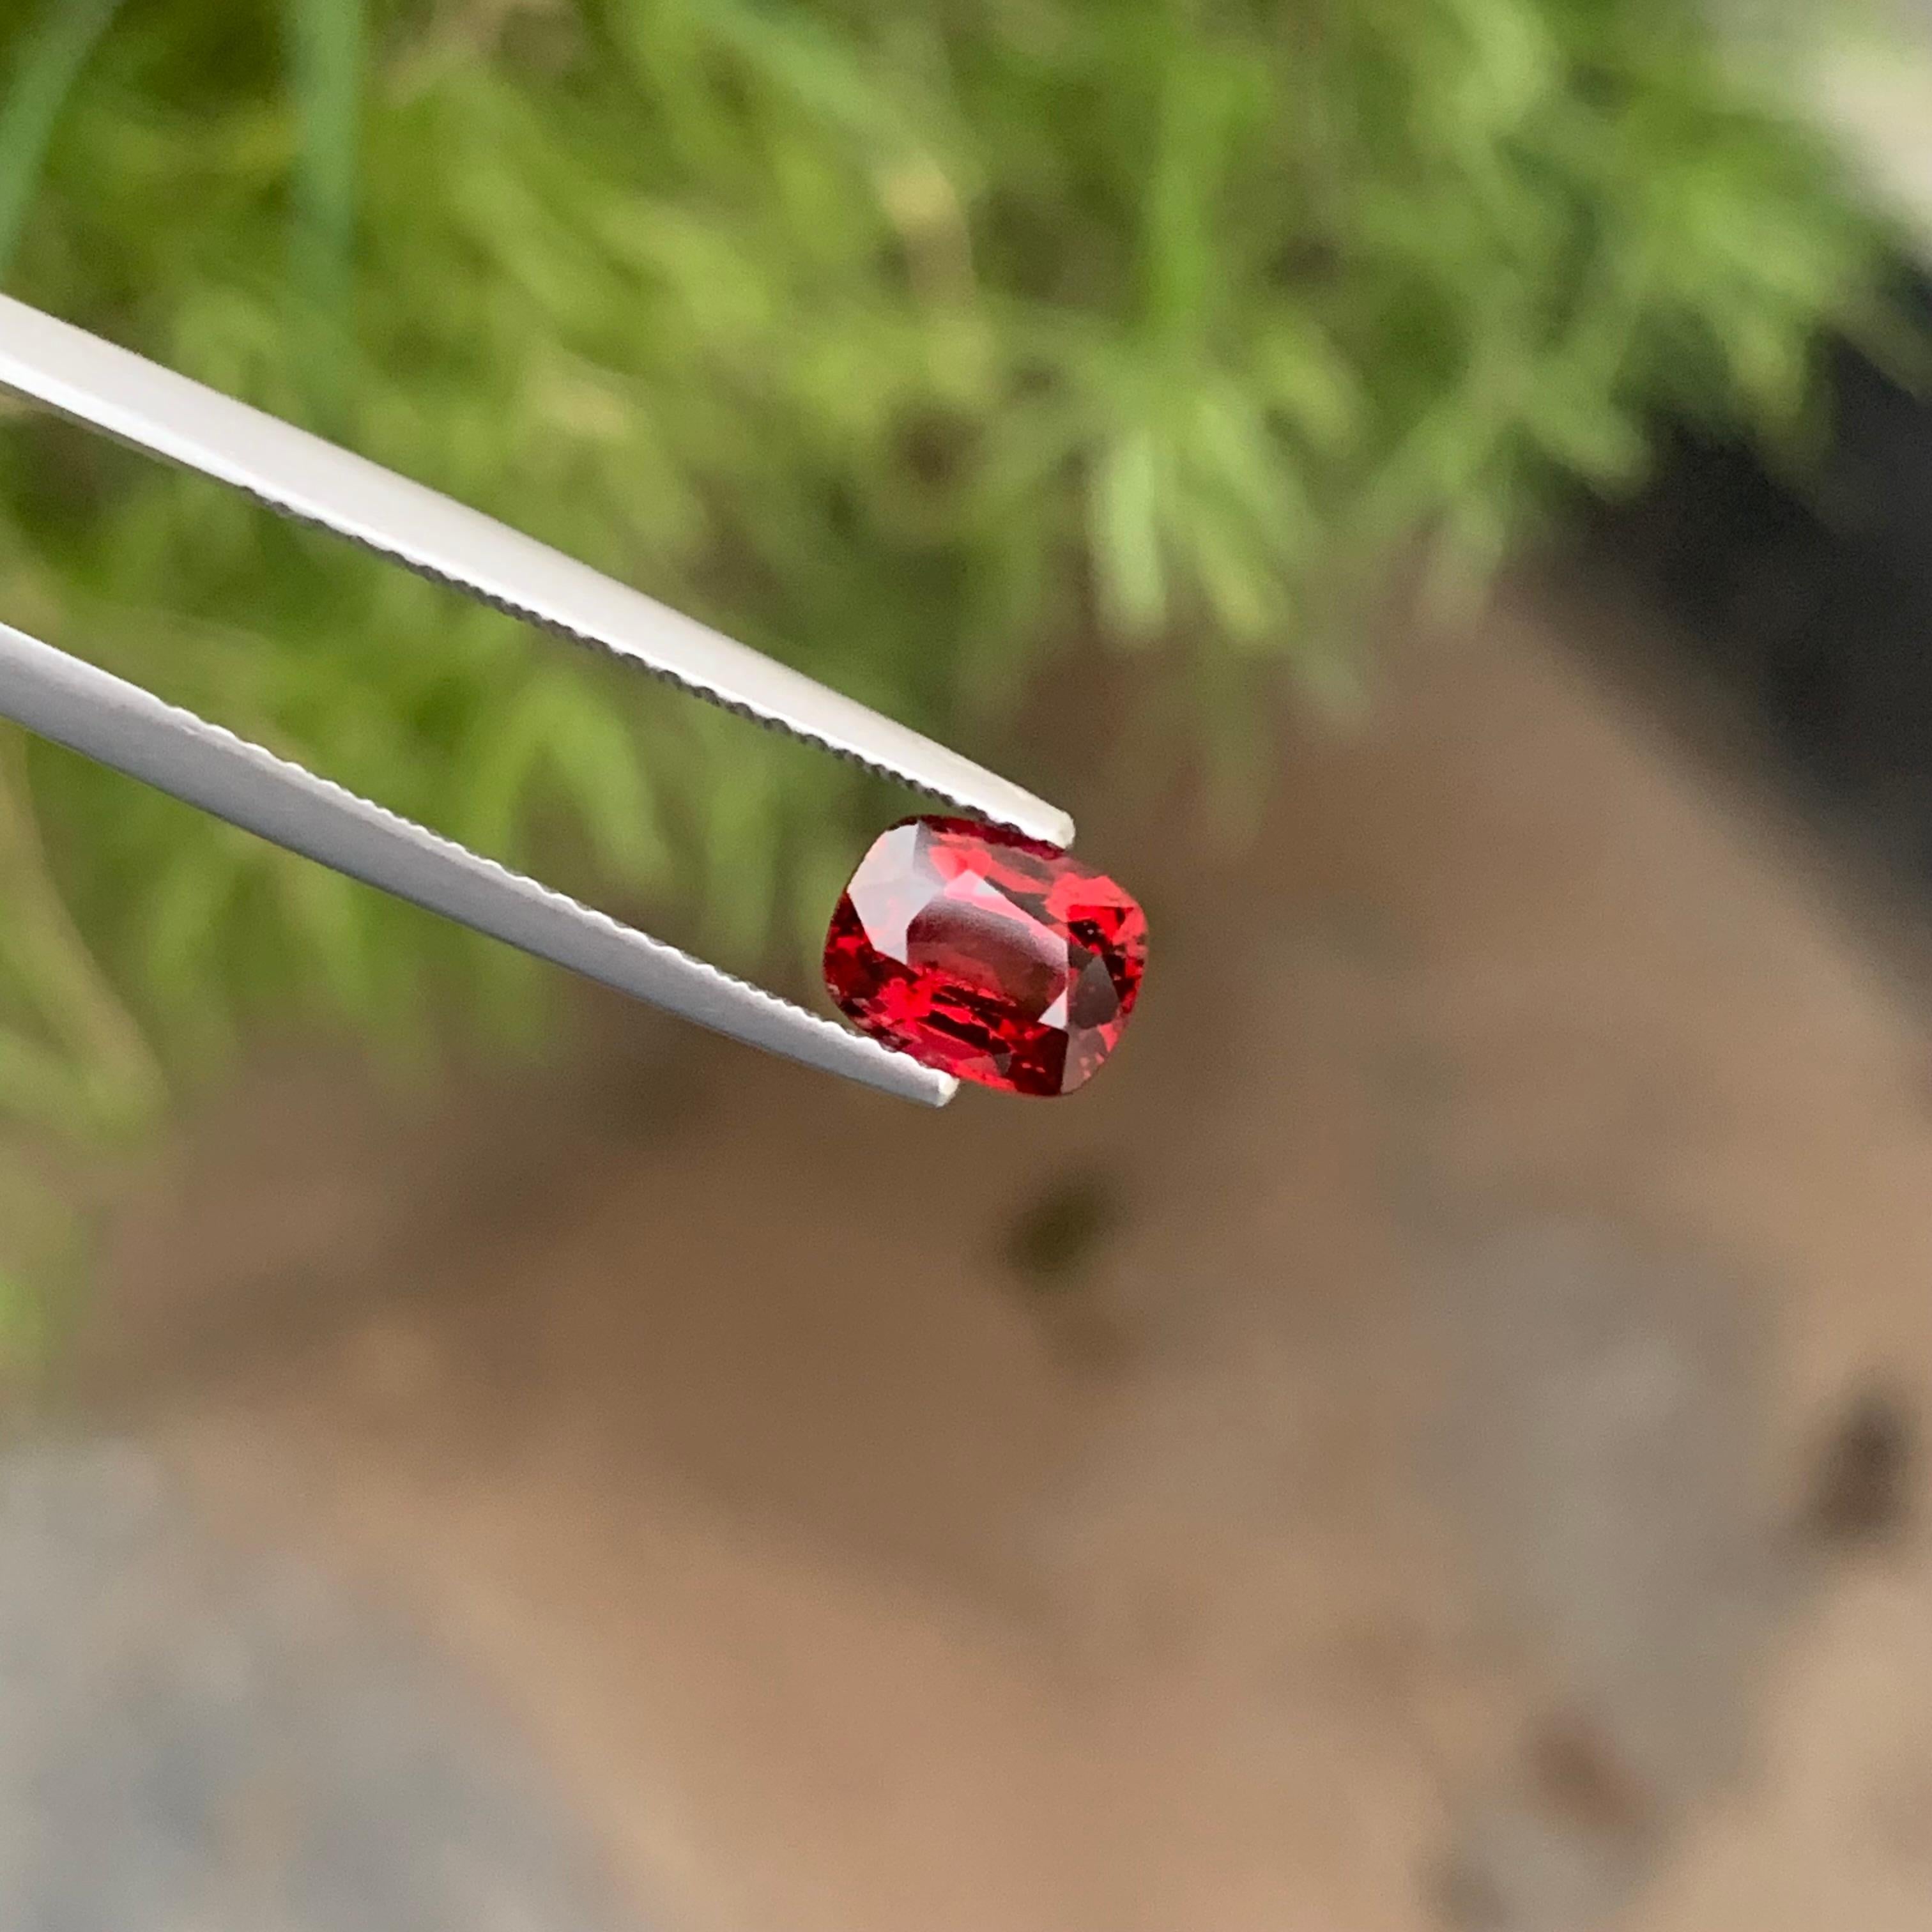 Exceptional 1.15 Carat Natural Loose Red Spinel From Burma Myanmar For Sale 5